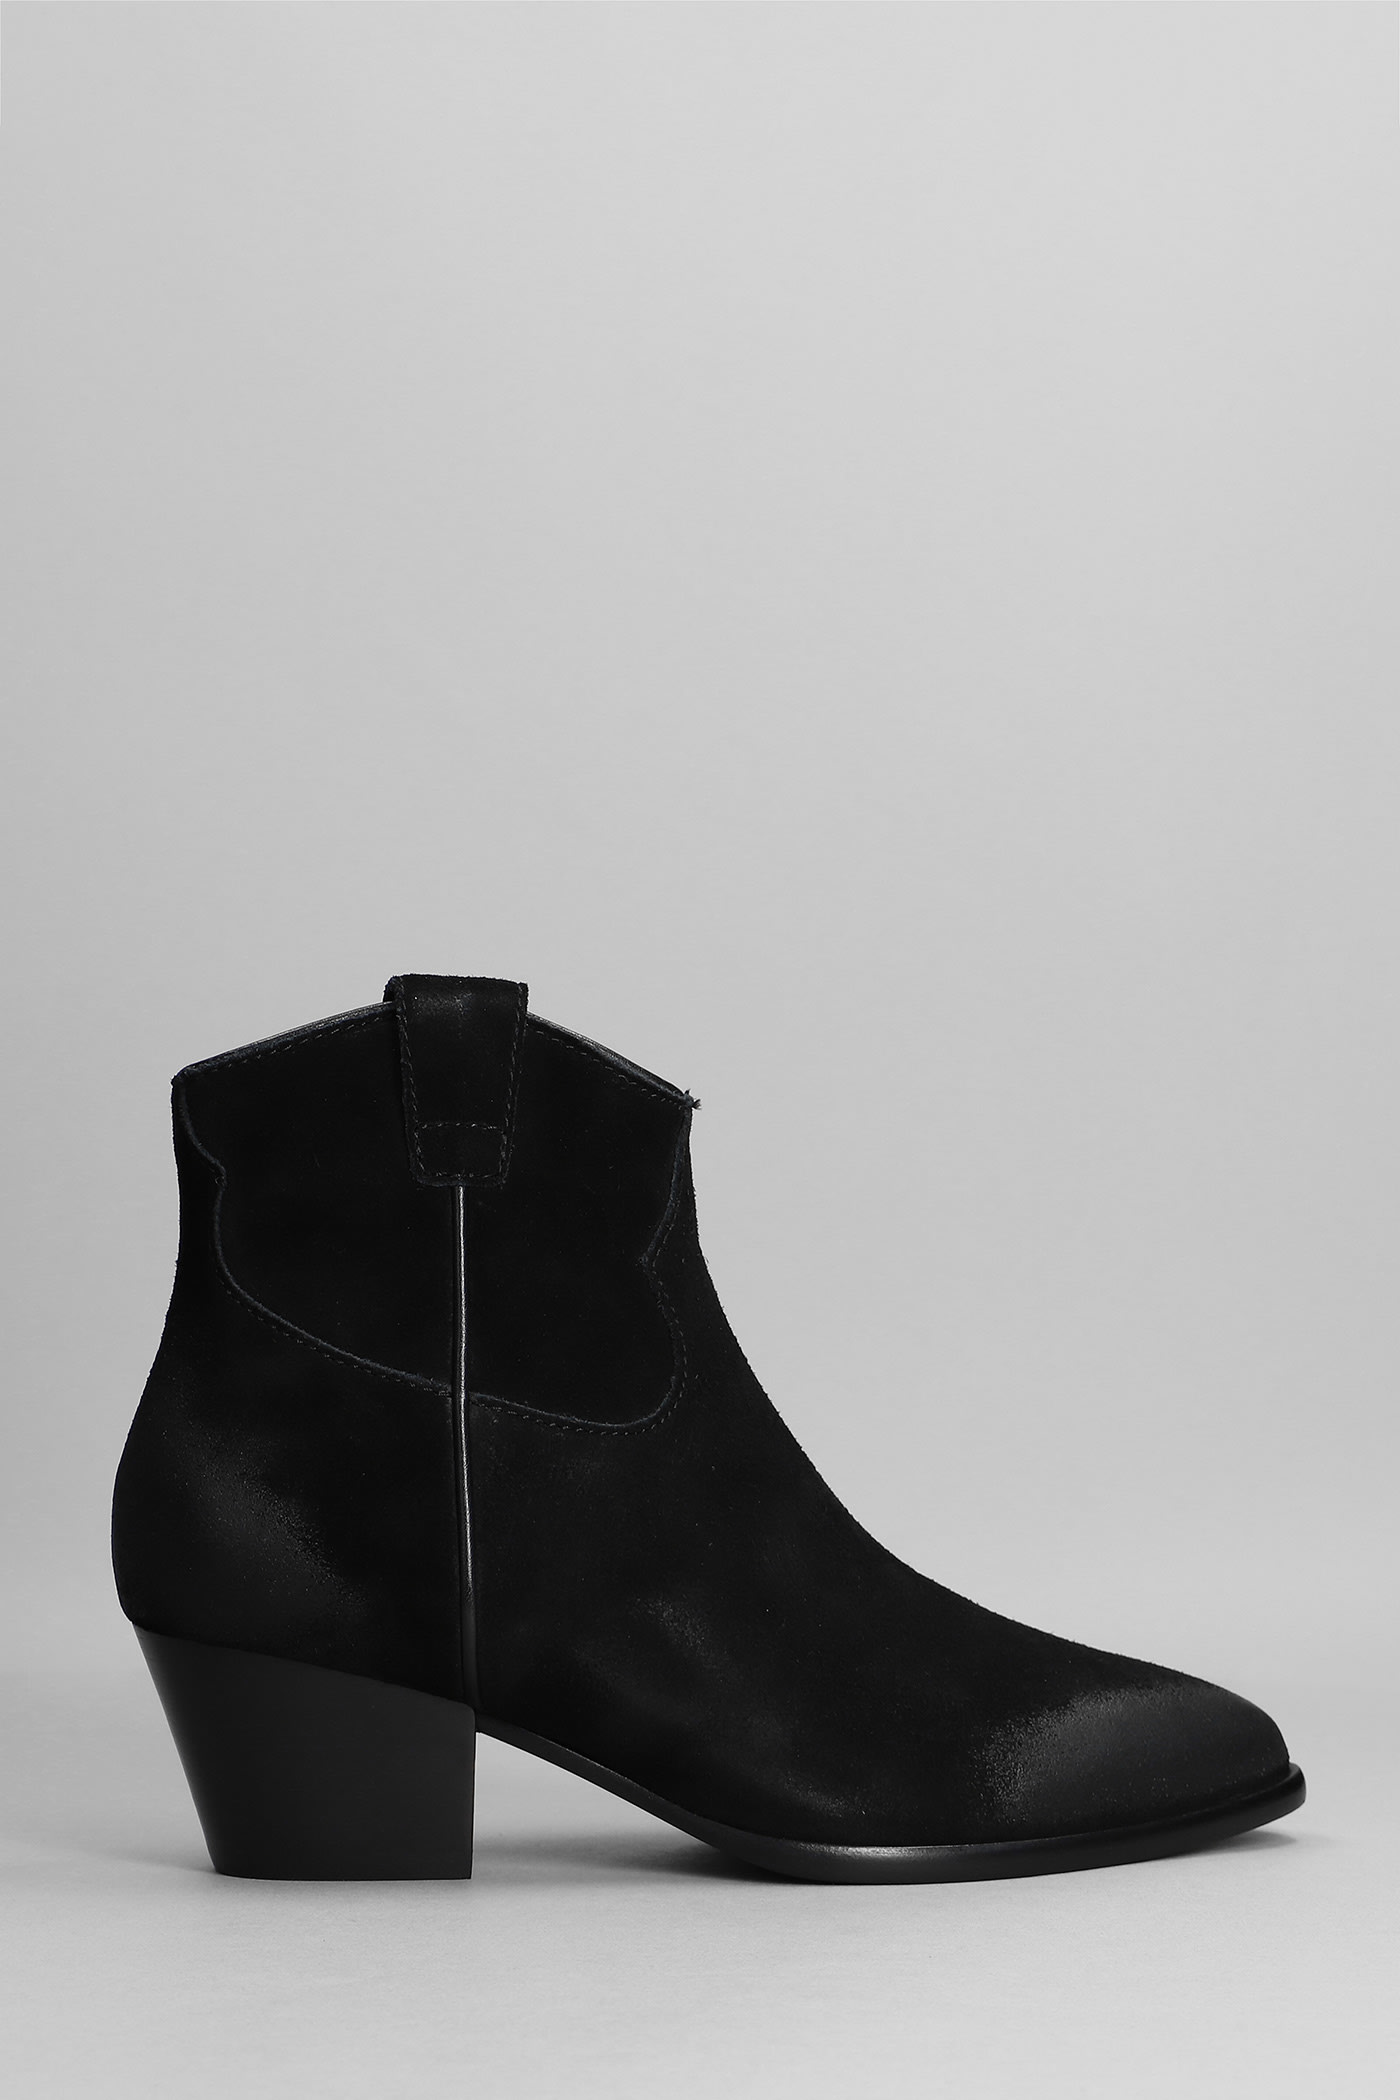 Ash Houston Texan Ankle Boots In Black Suede